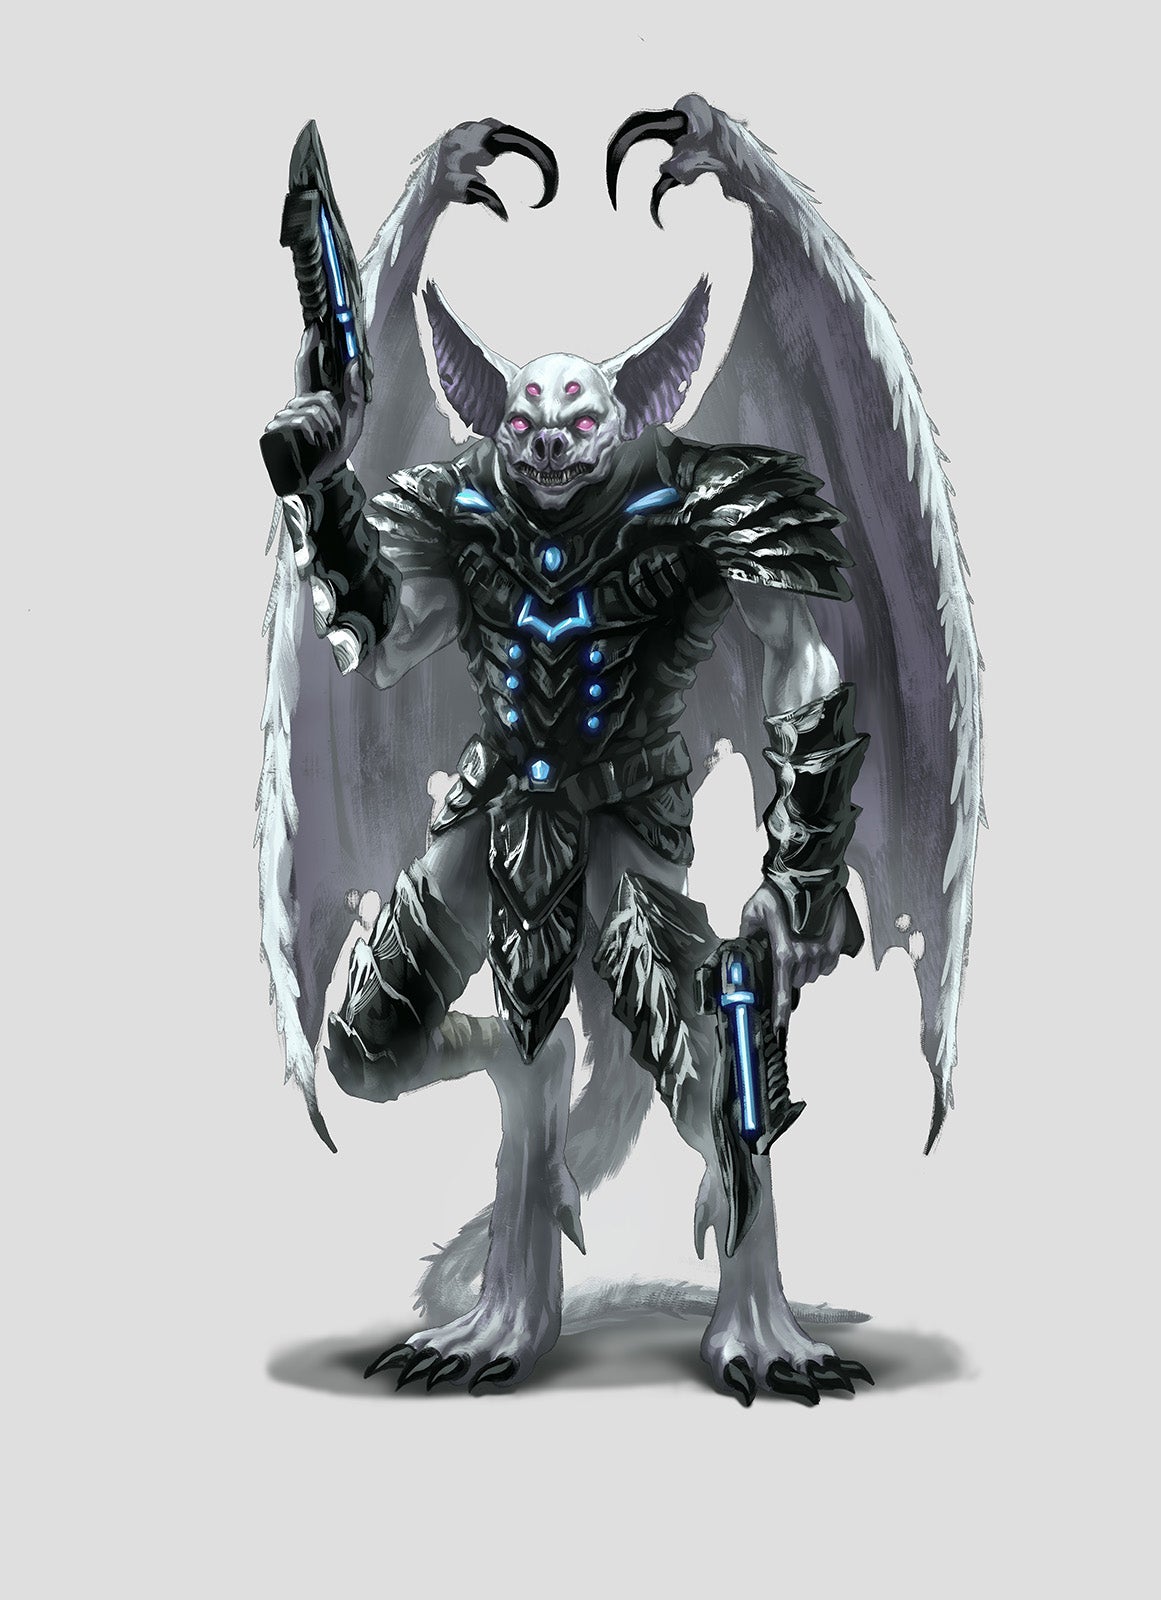 A Starfinder Grioth, a white furred, bat-like alien with large wings and a tail; dressed in dark armor, holding a laser pistol